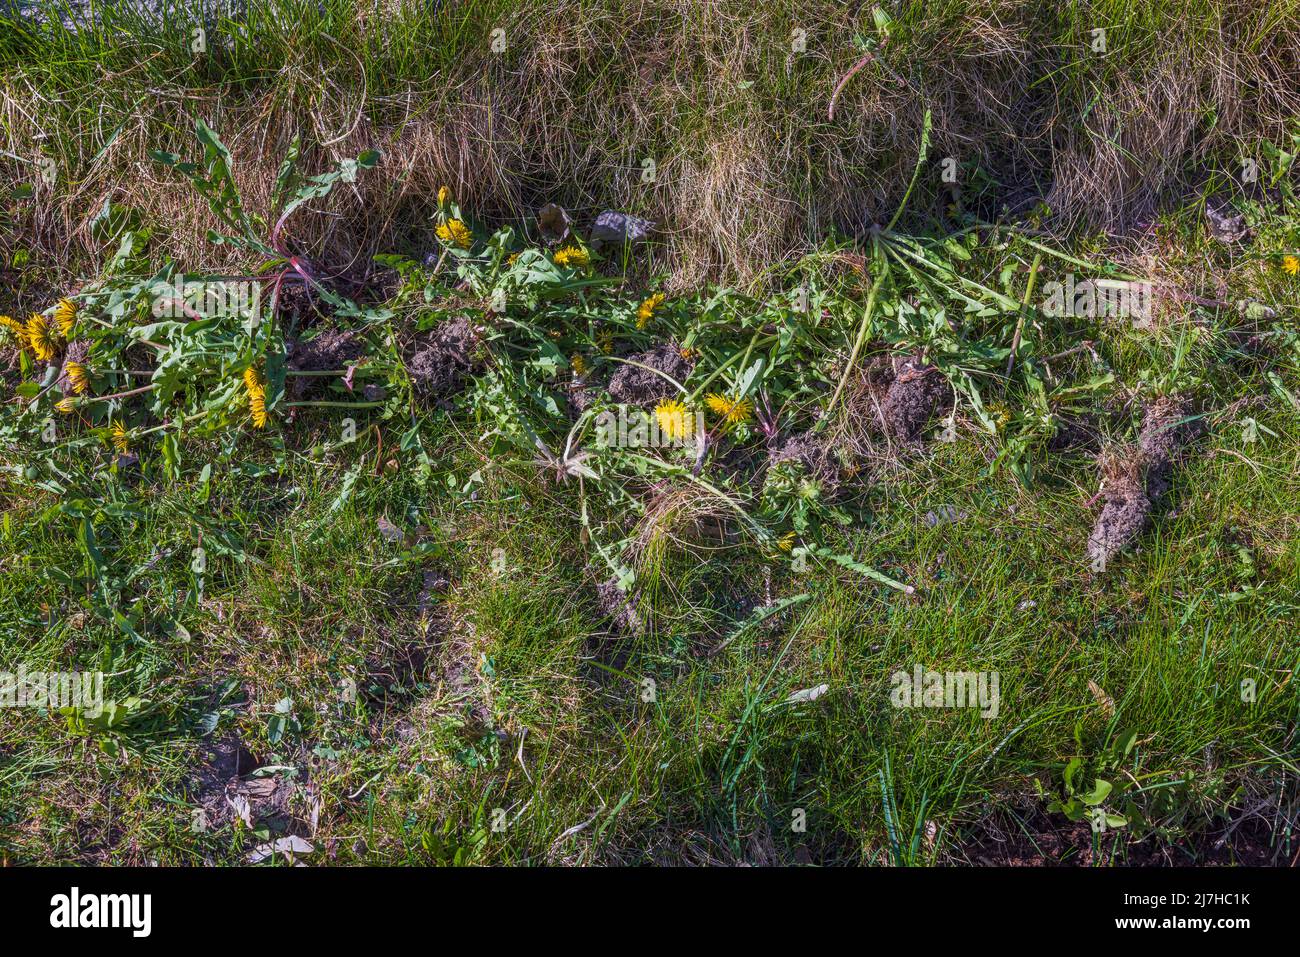 Close up of uprooted dandelion weeds lying on lawn. Sweden. Stock Photo